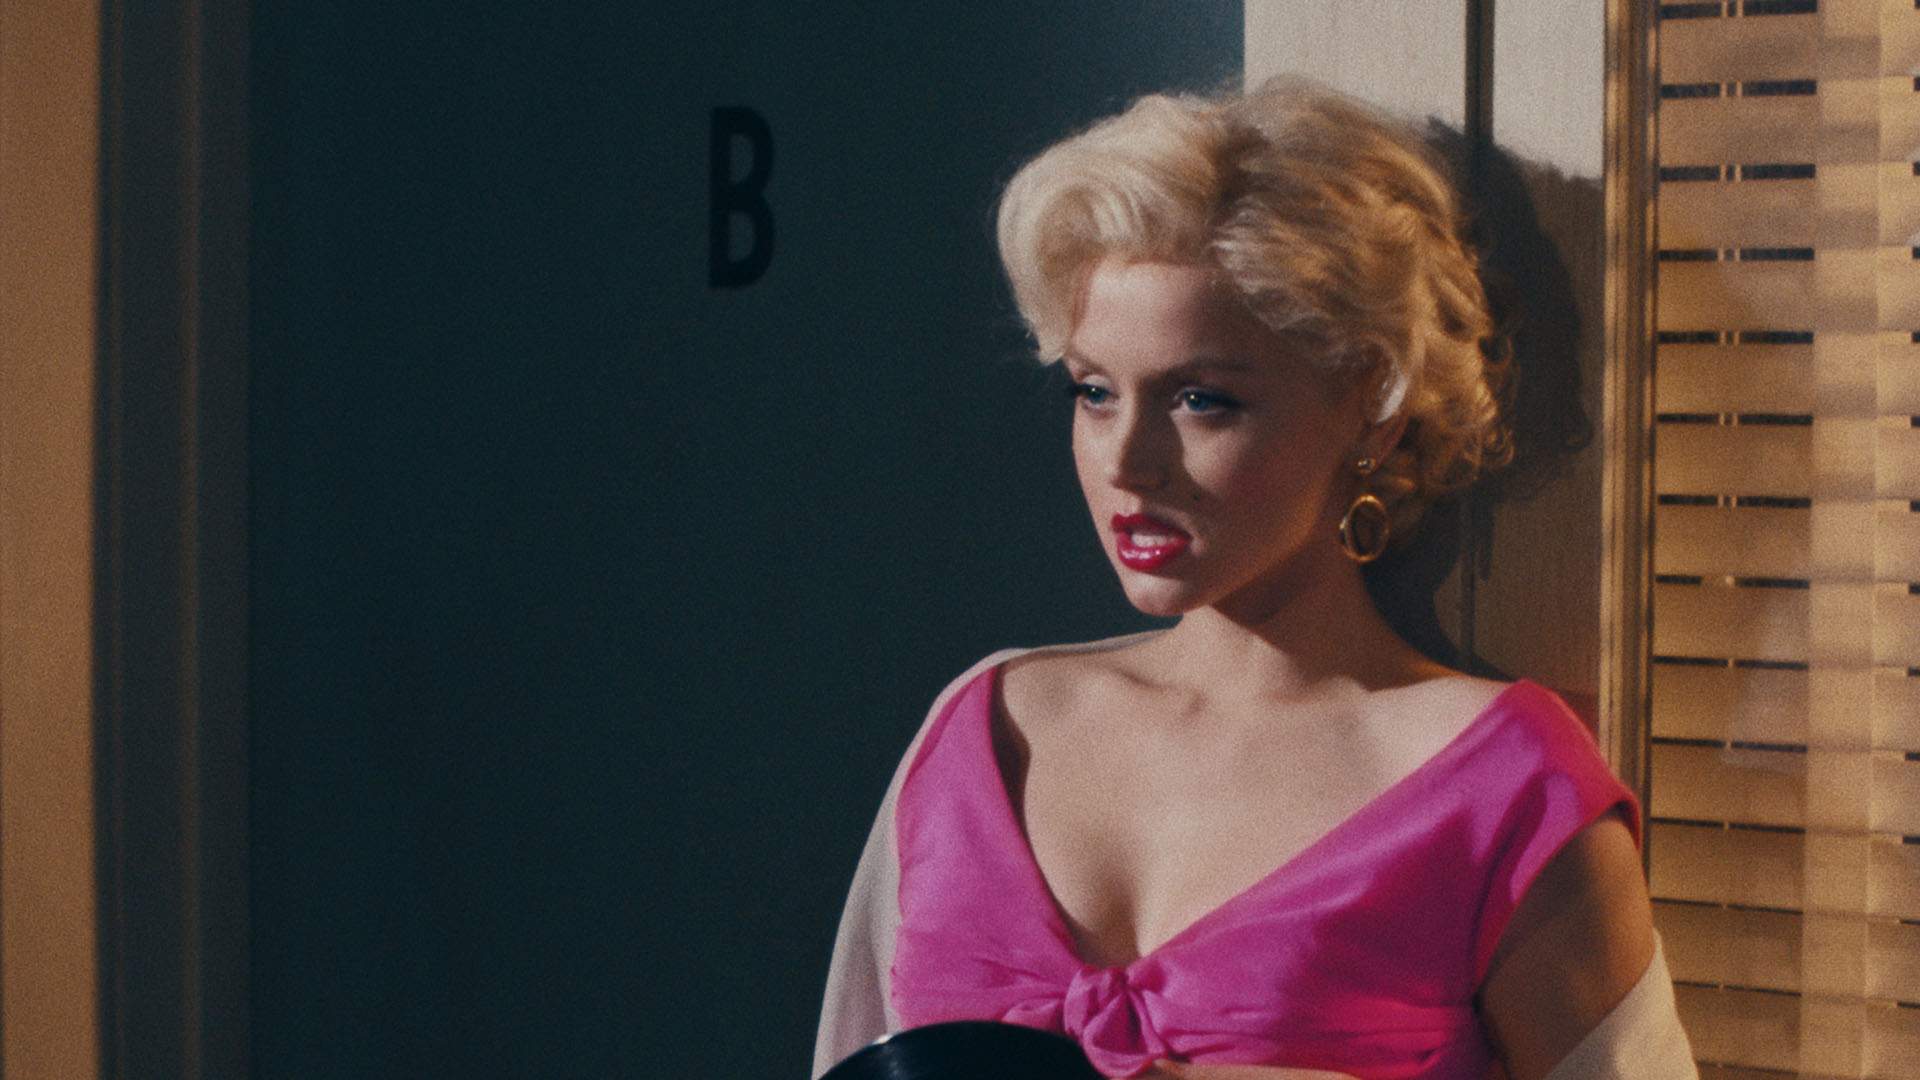 Ana de Armas Transforms Into Marilyn Monroe in the Haunting Trailer for Netflix Film 'Blonde'